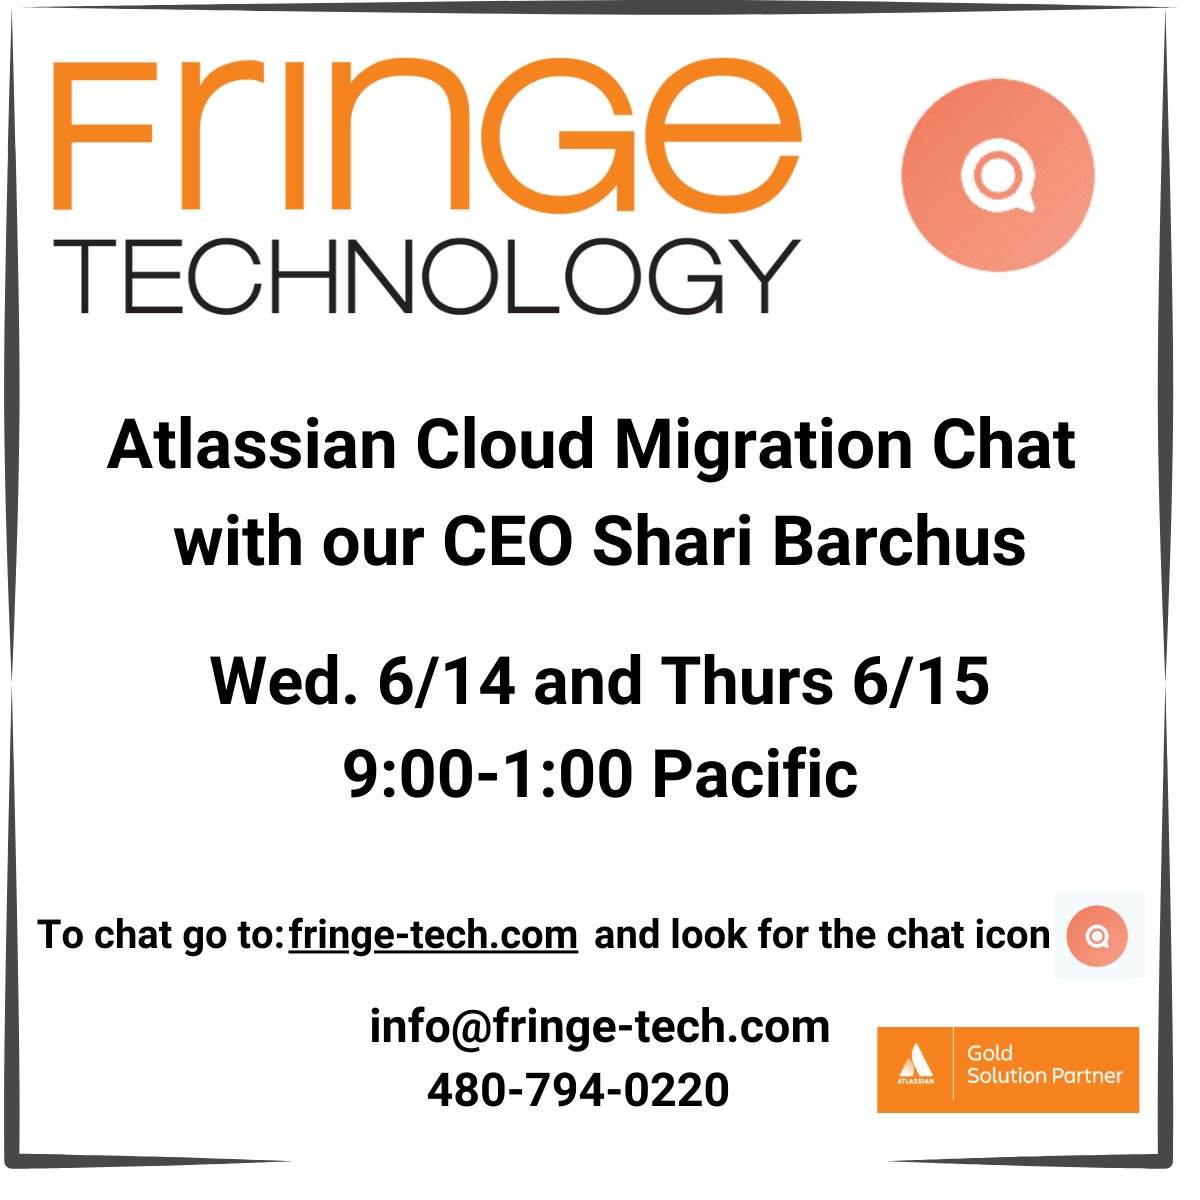 Our CEO is taking over the chat queue on Wed and Thurs, June 14th-15th, from 9:00am-1:00pm Pacific to answer all of your 🔥 burning questions about #AtlassianCloud Migration!
See you in the chat queue! fringe-tech.com/cloud-migratio…

#cloudmigration #Atlassian #Atlassiancloudmigration